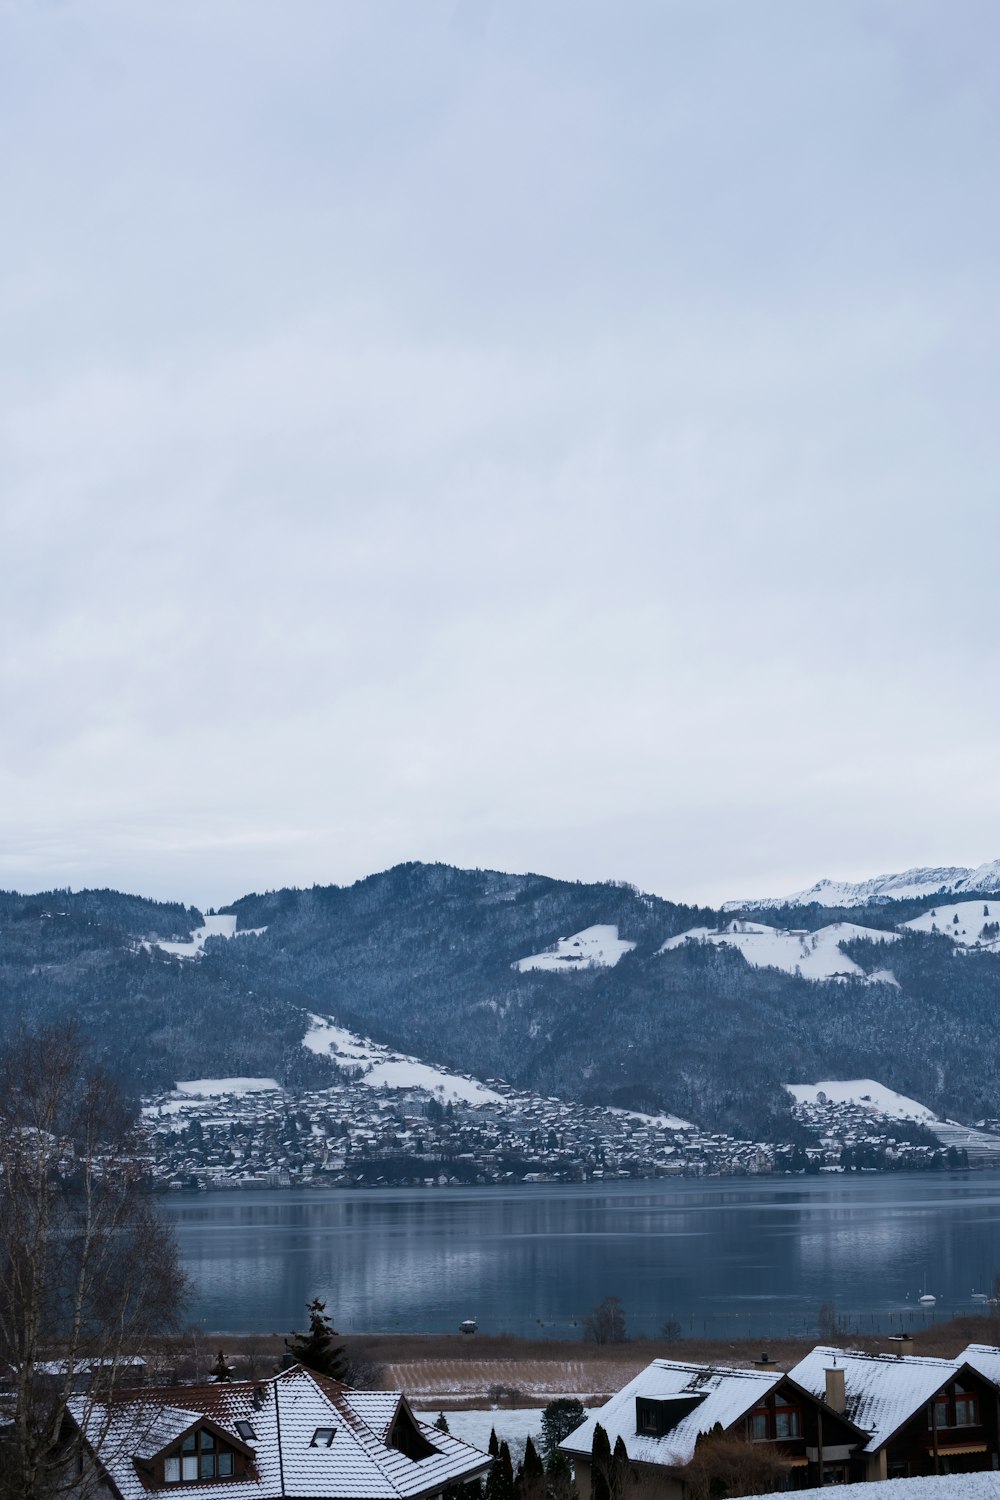 snow covered mountains near body of water during daytime